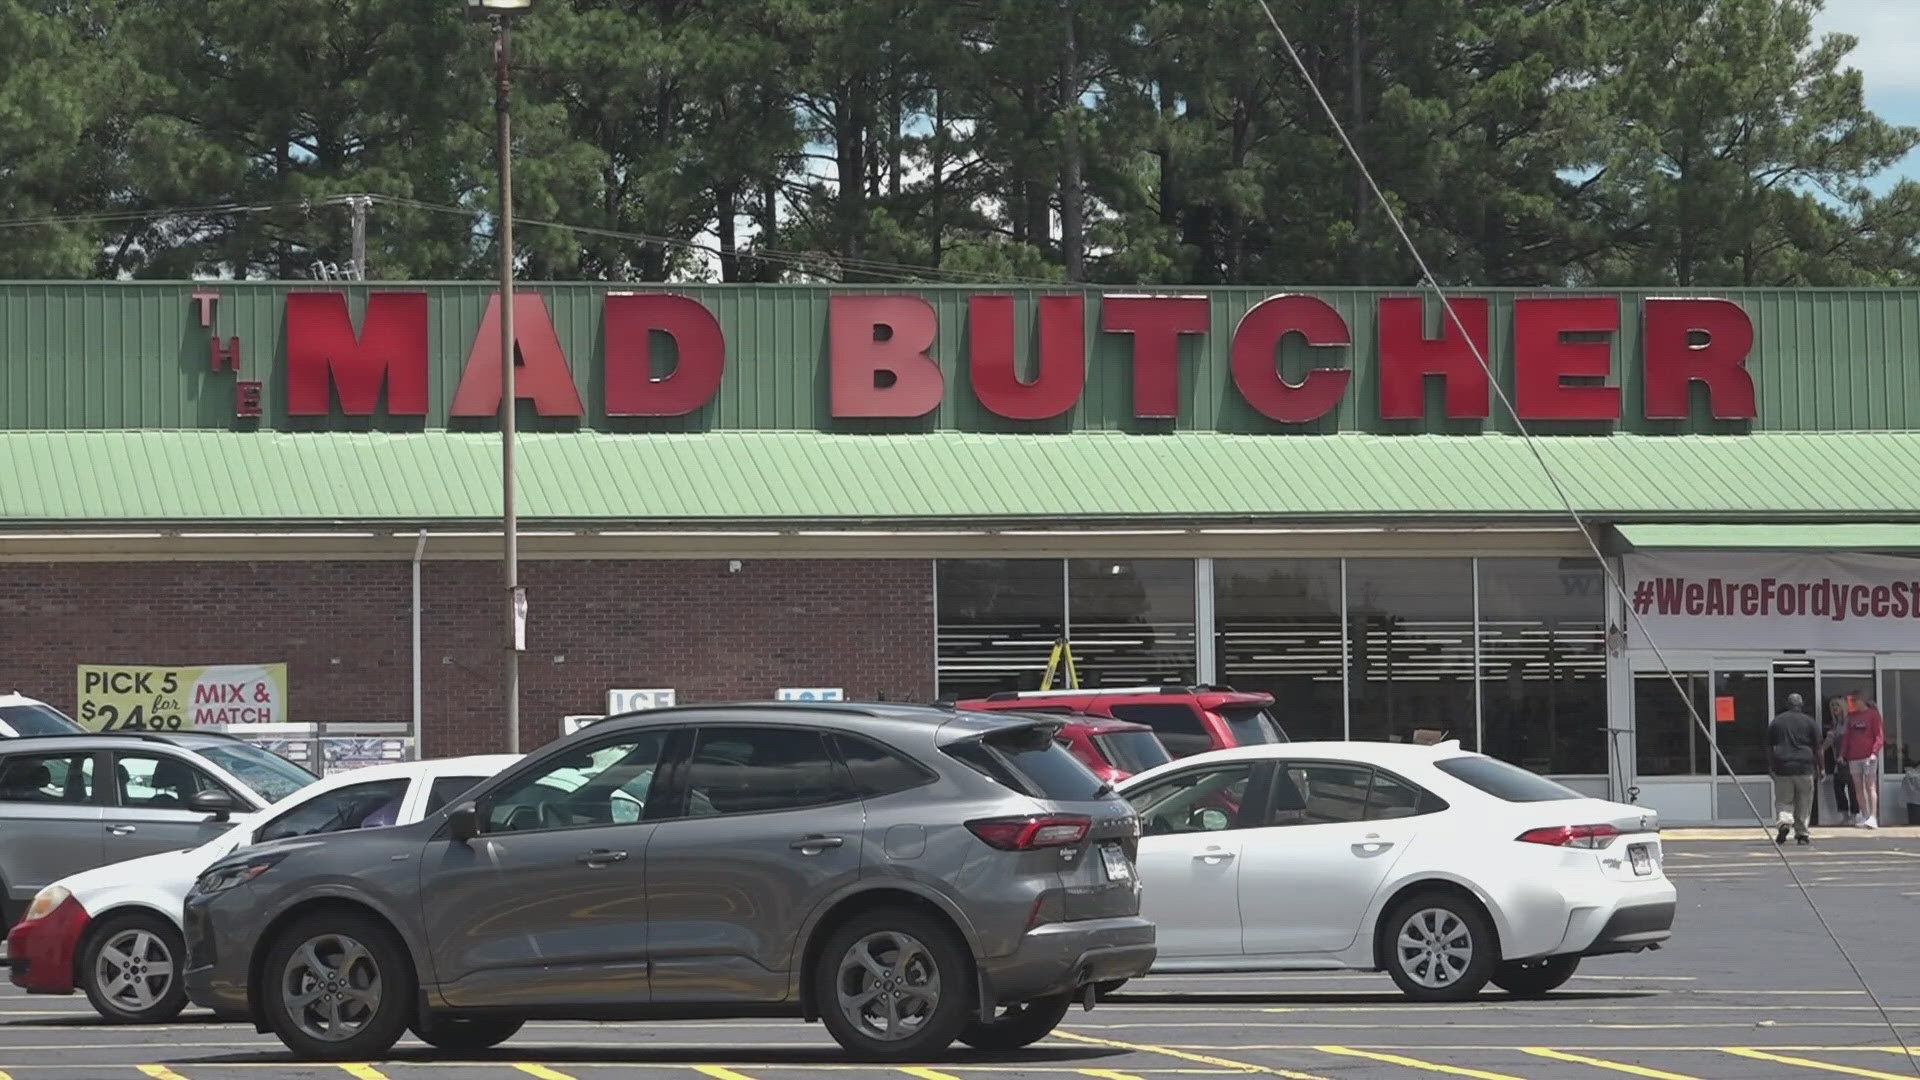 The Mad Butcher grocery store will re-open for the first time since last month's mass shooting. Here's what the community has to say.